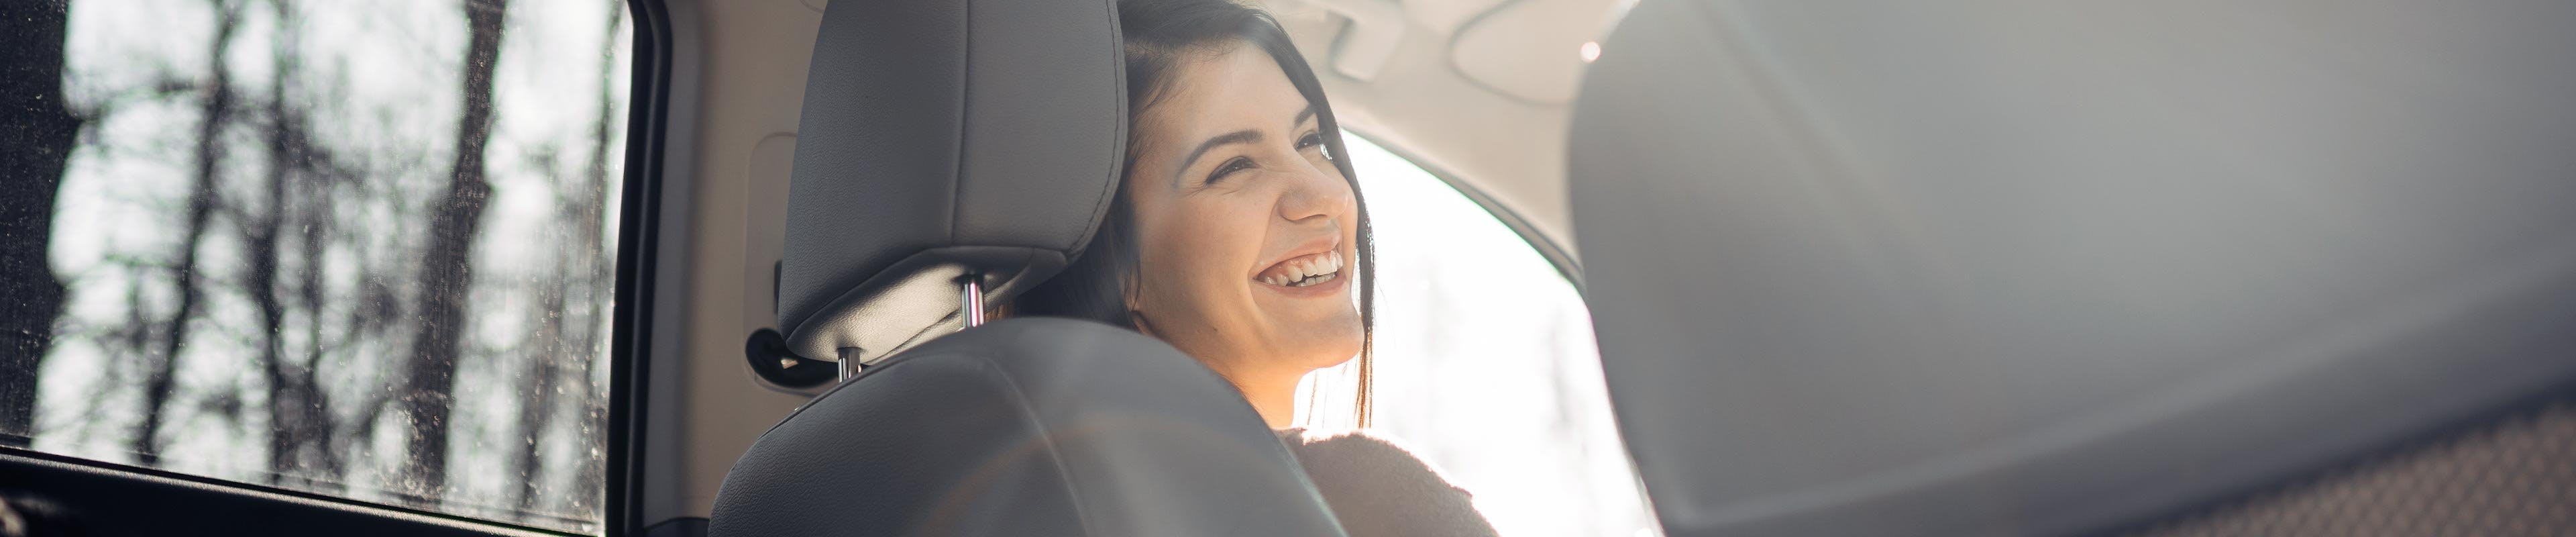 Happy young woman in driver's seat driving after purchasing the right amount of car insurance coverage.